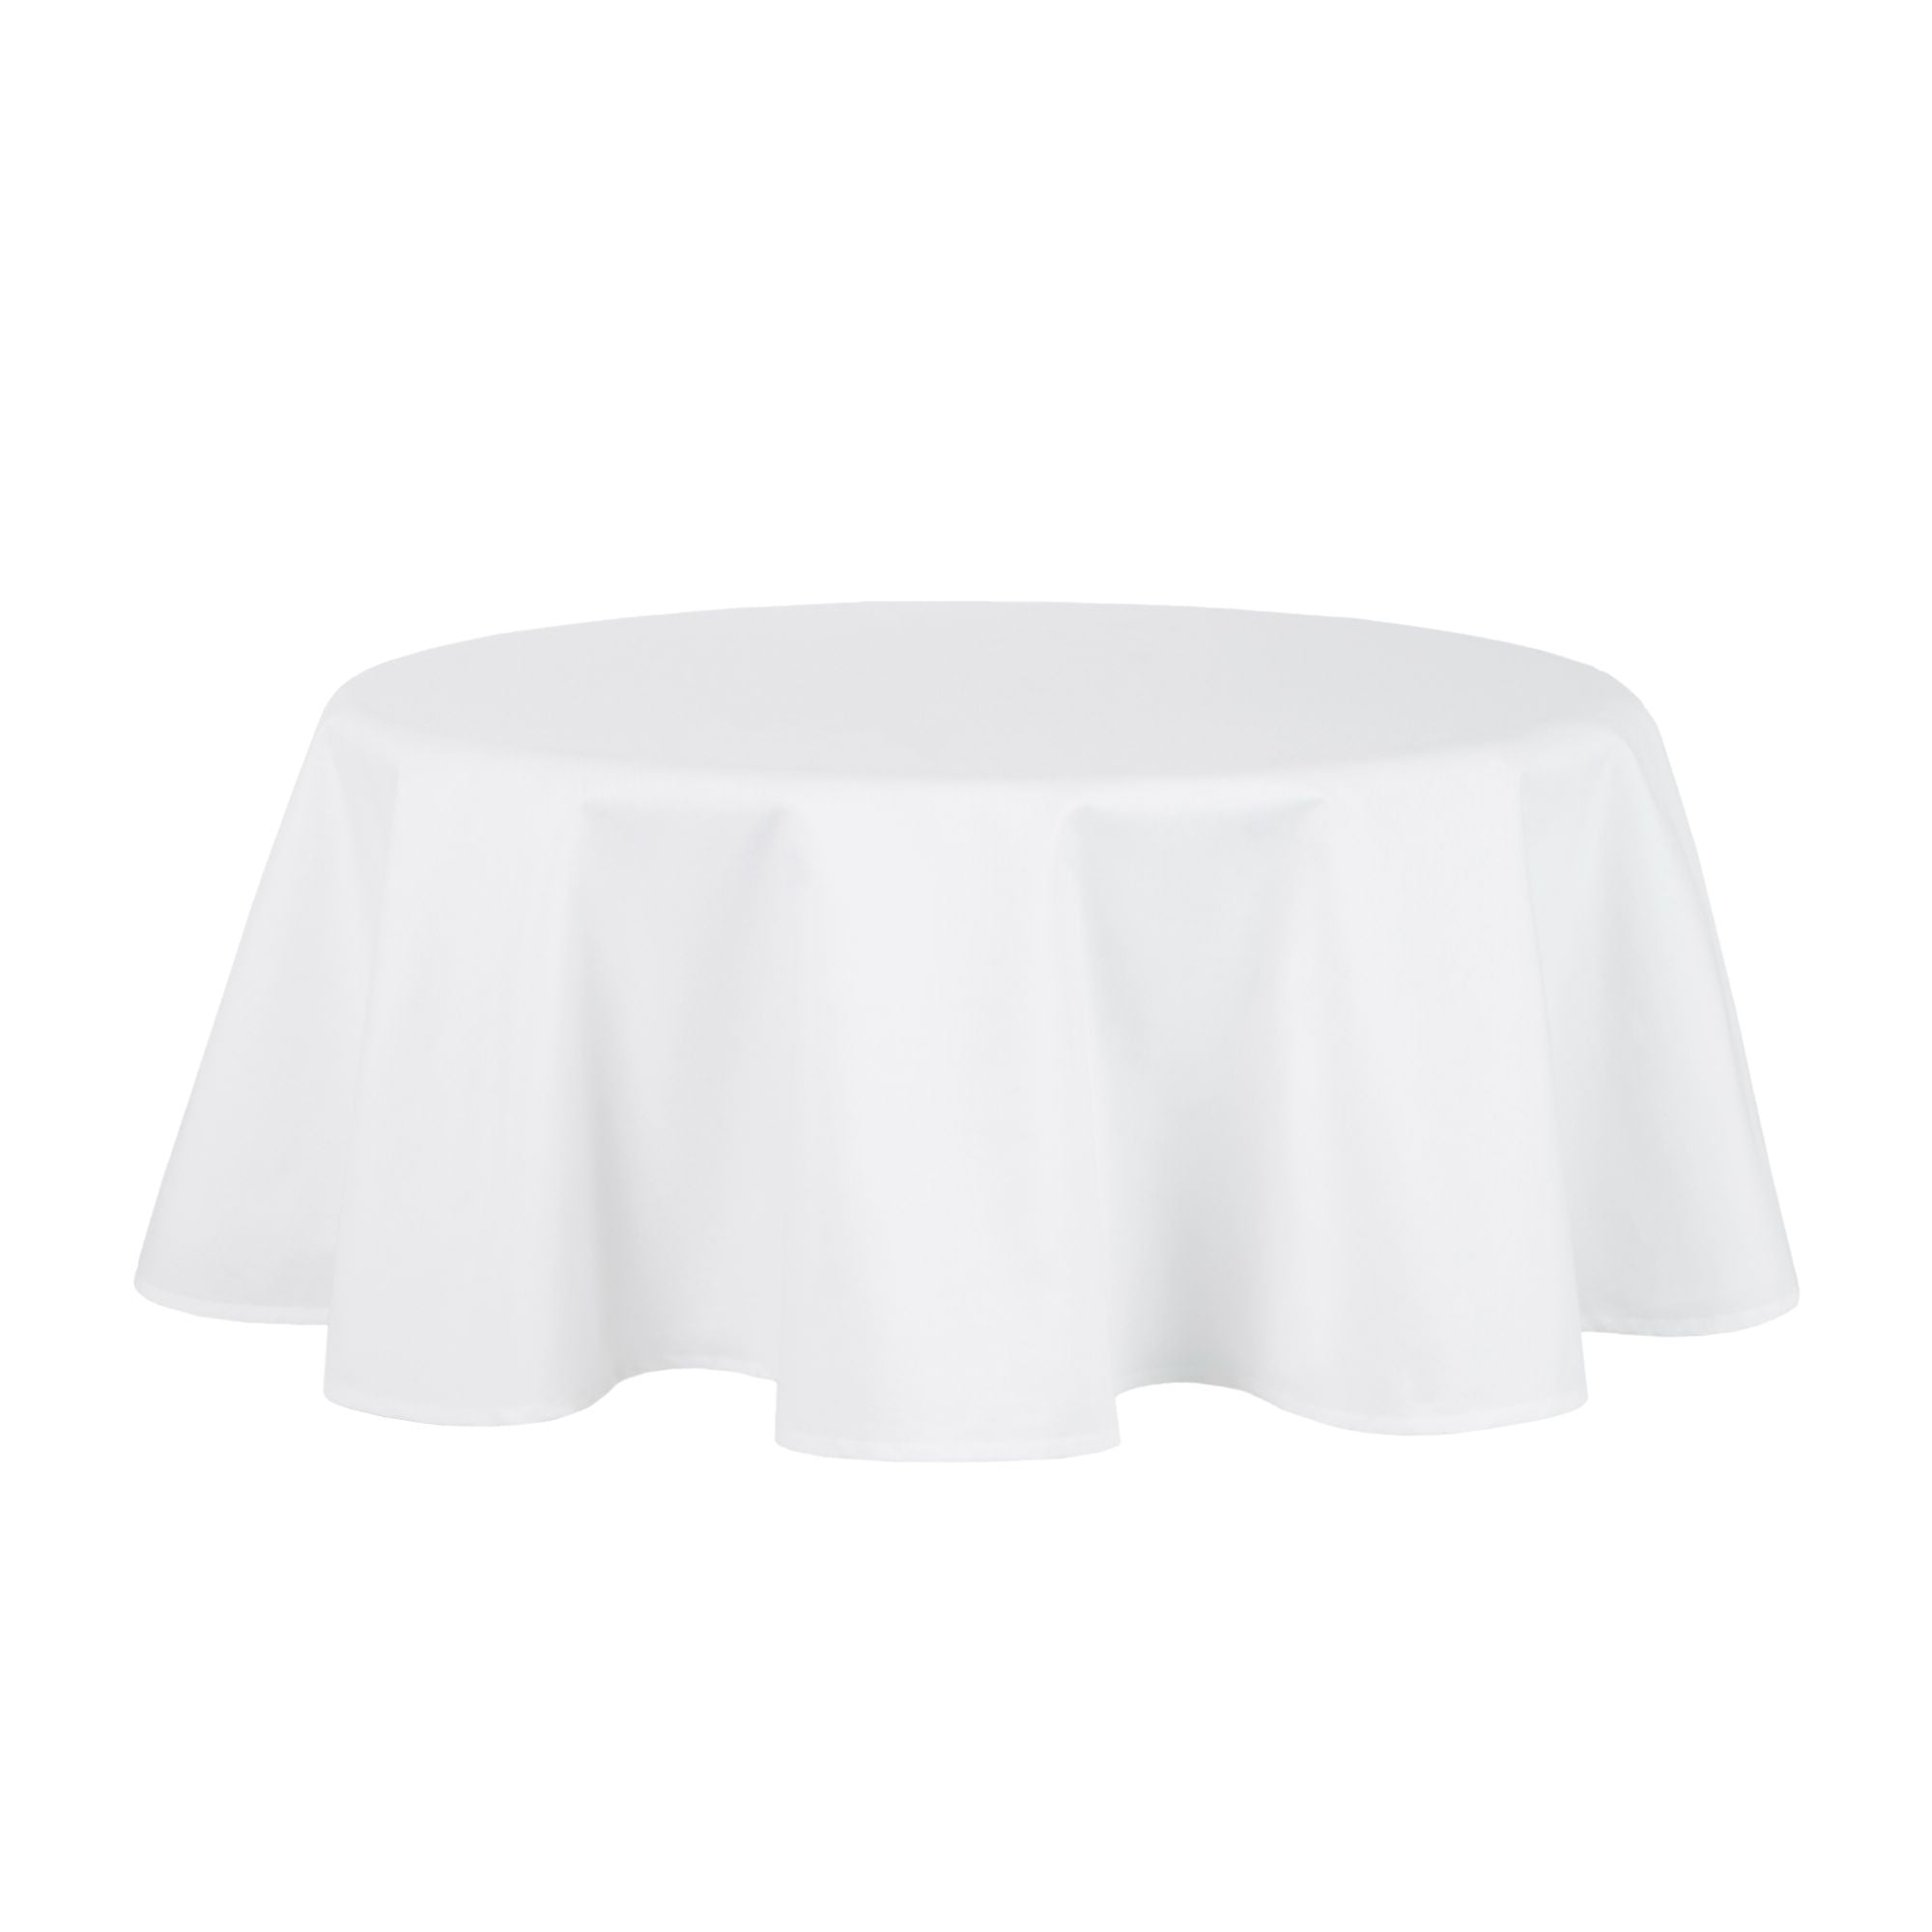 Mainstays Yale Tablecloth, White, 70" Round, Available in various sizes and colors